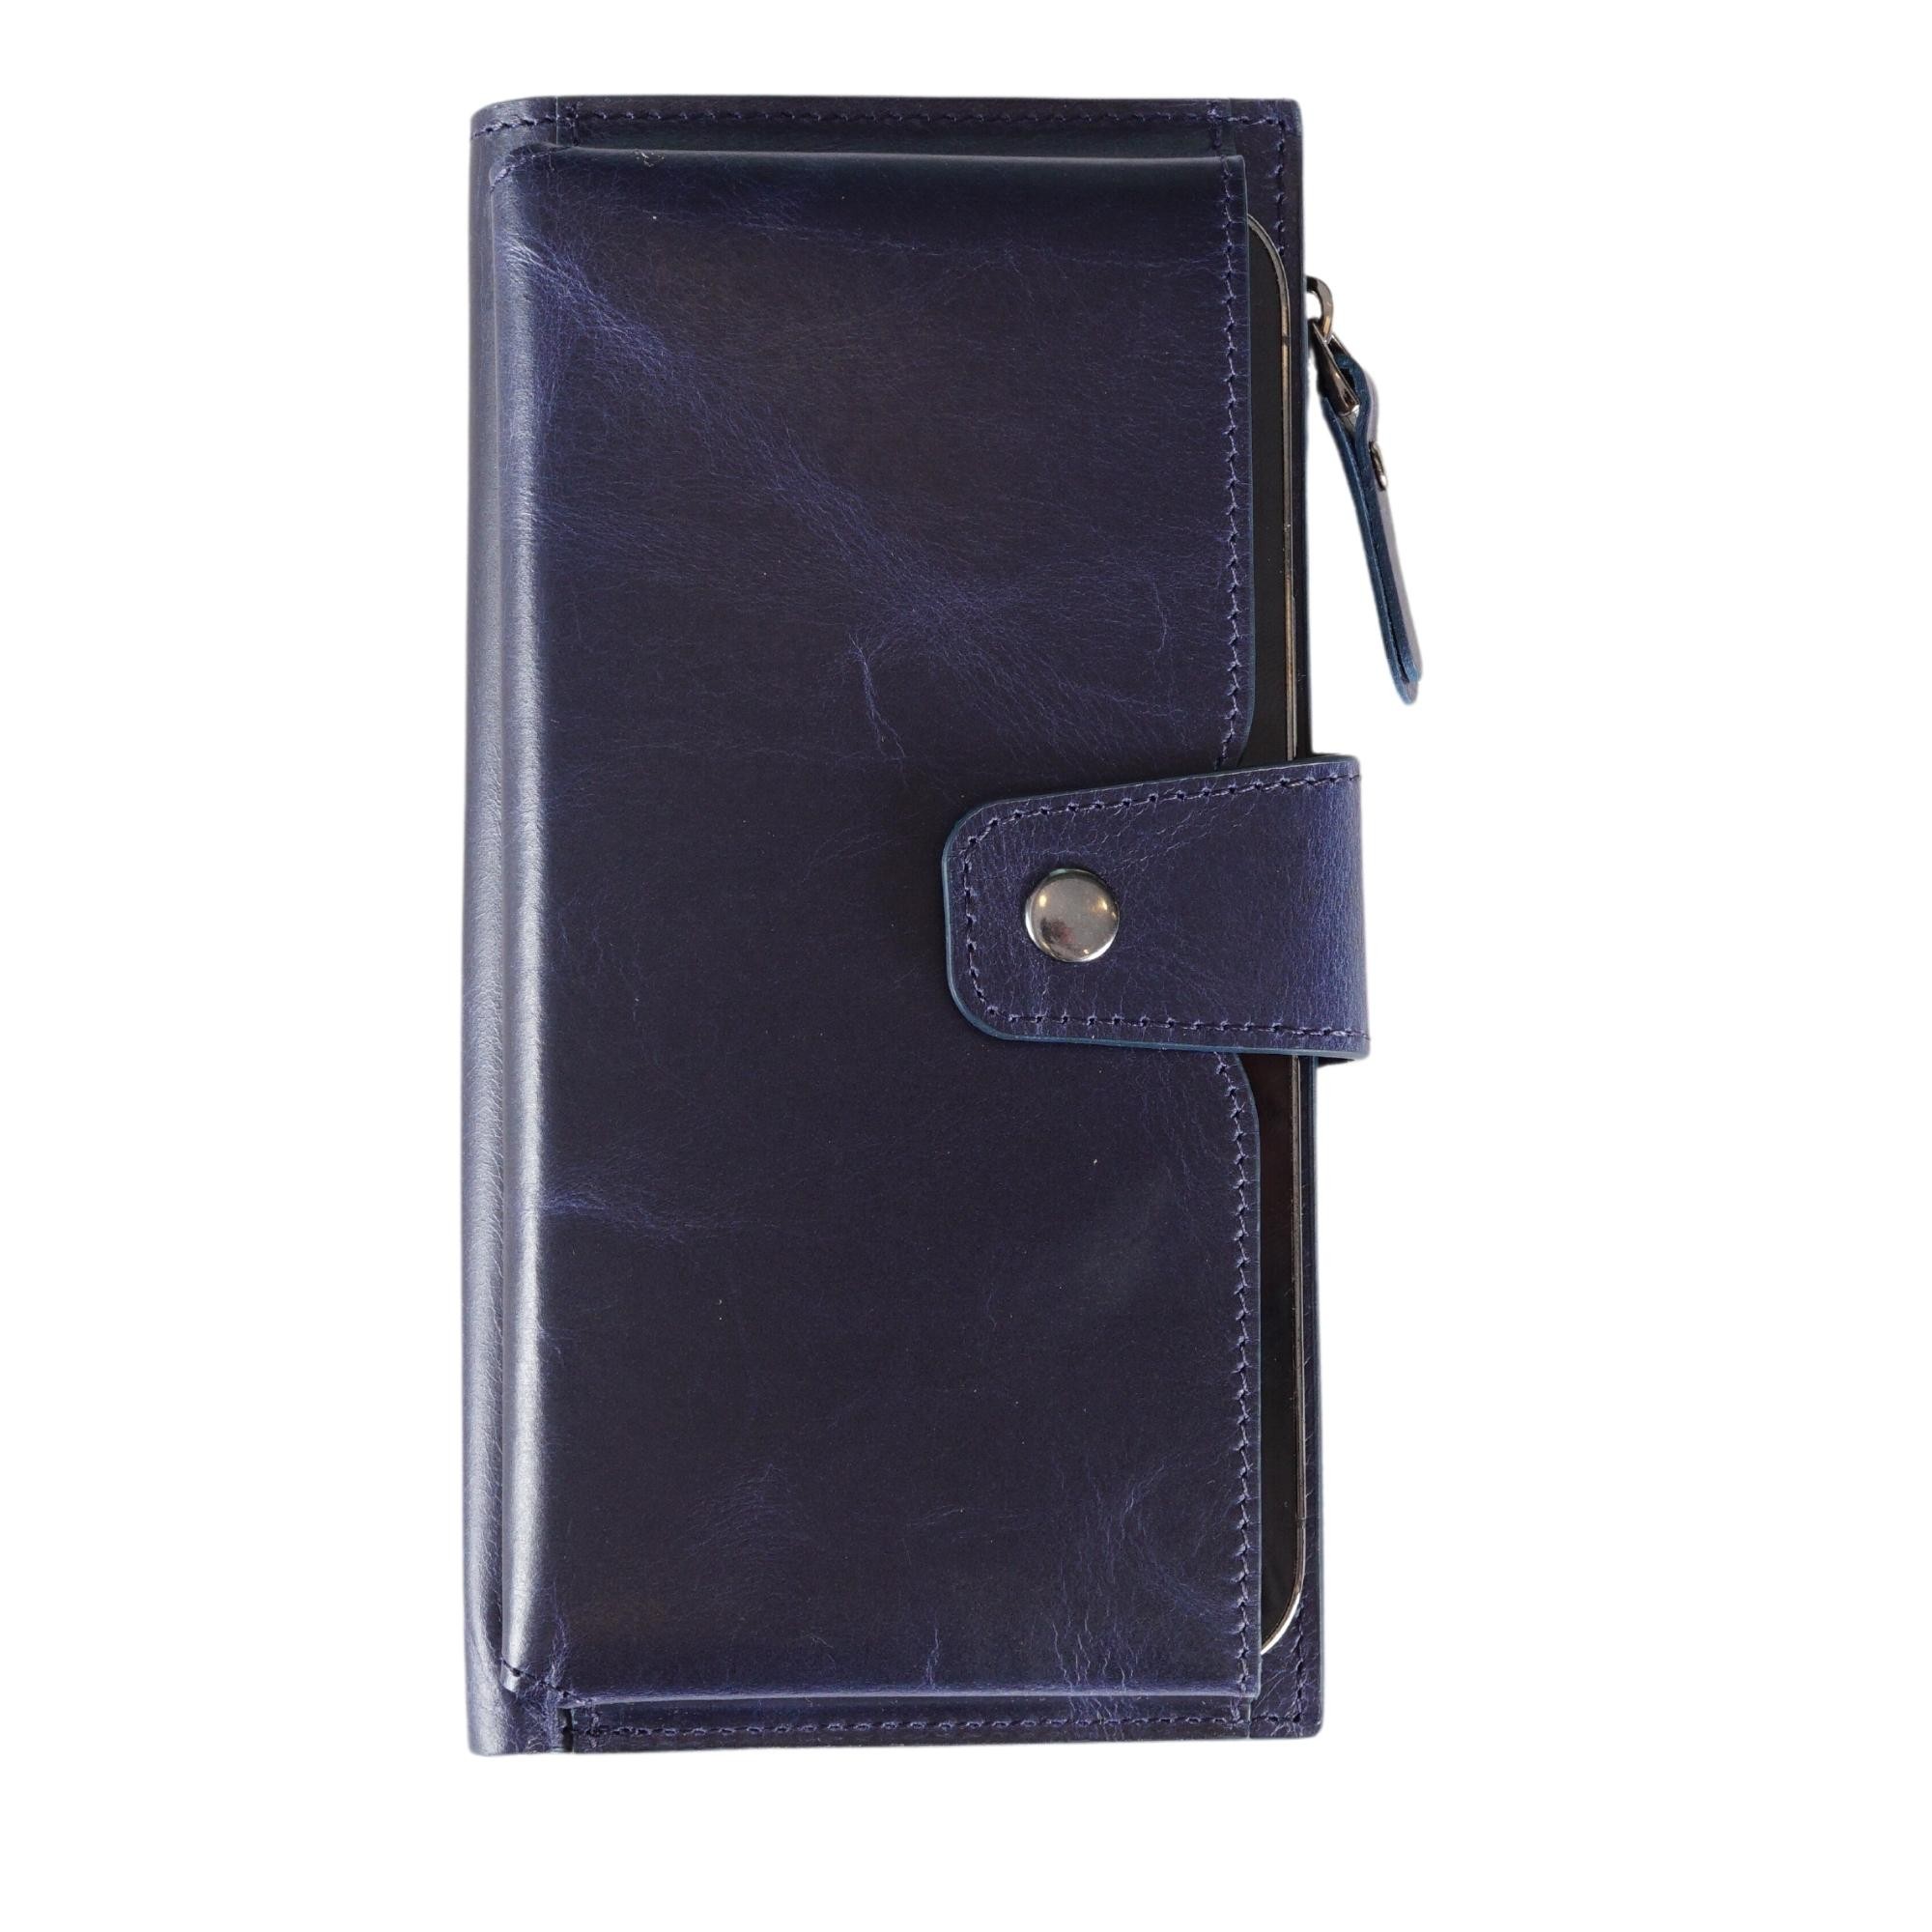 Genuine Leather Wallet with Phone - Navy Blue